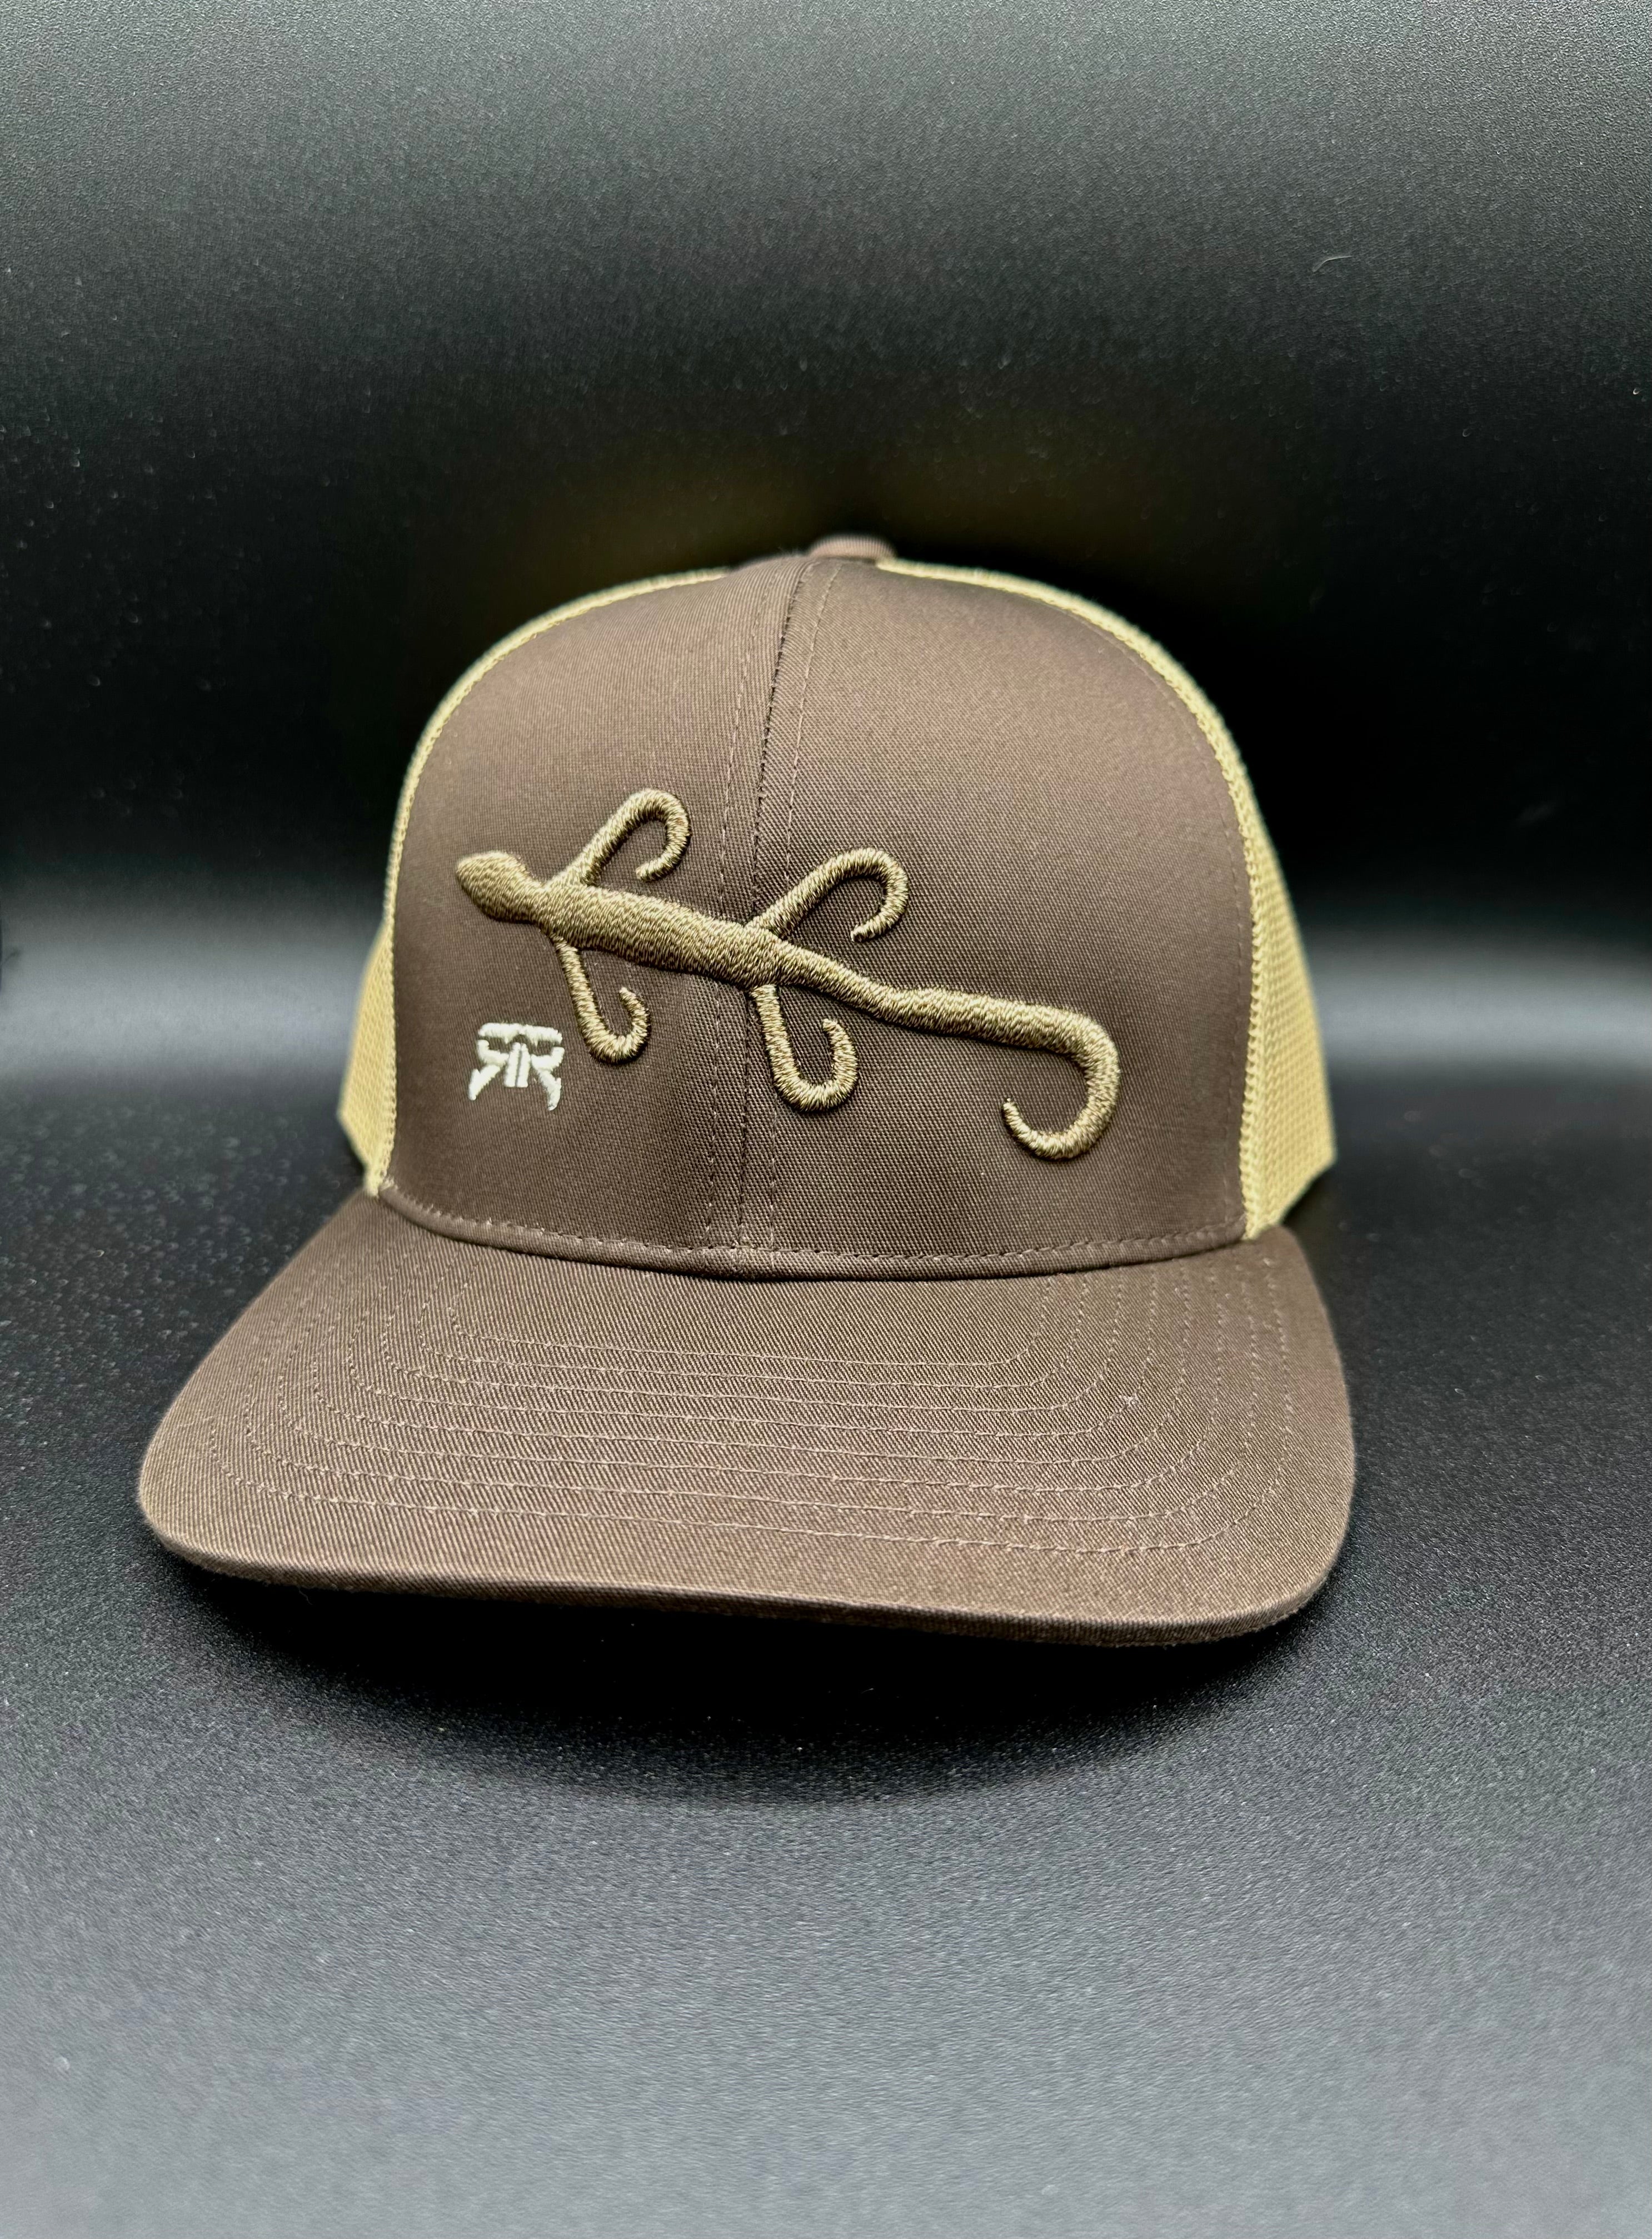 Fish Design Leather Patch Hat, Cool Hat, Khaki and Brown Trucker Hat, Bass  Hunting Hat, Unisex Hat, Mens or Womens Animal Hat -  Canada